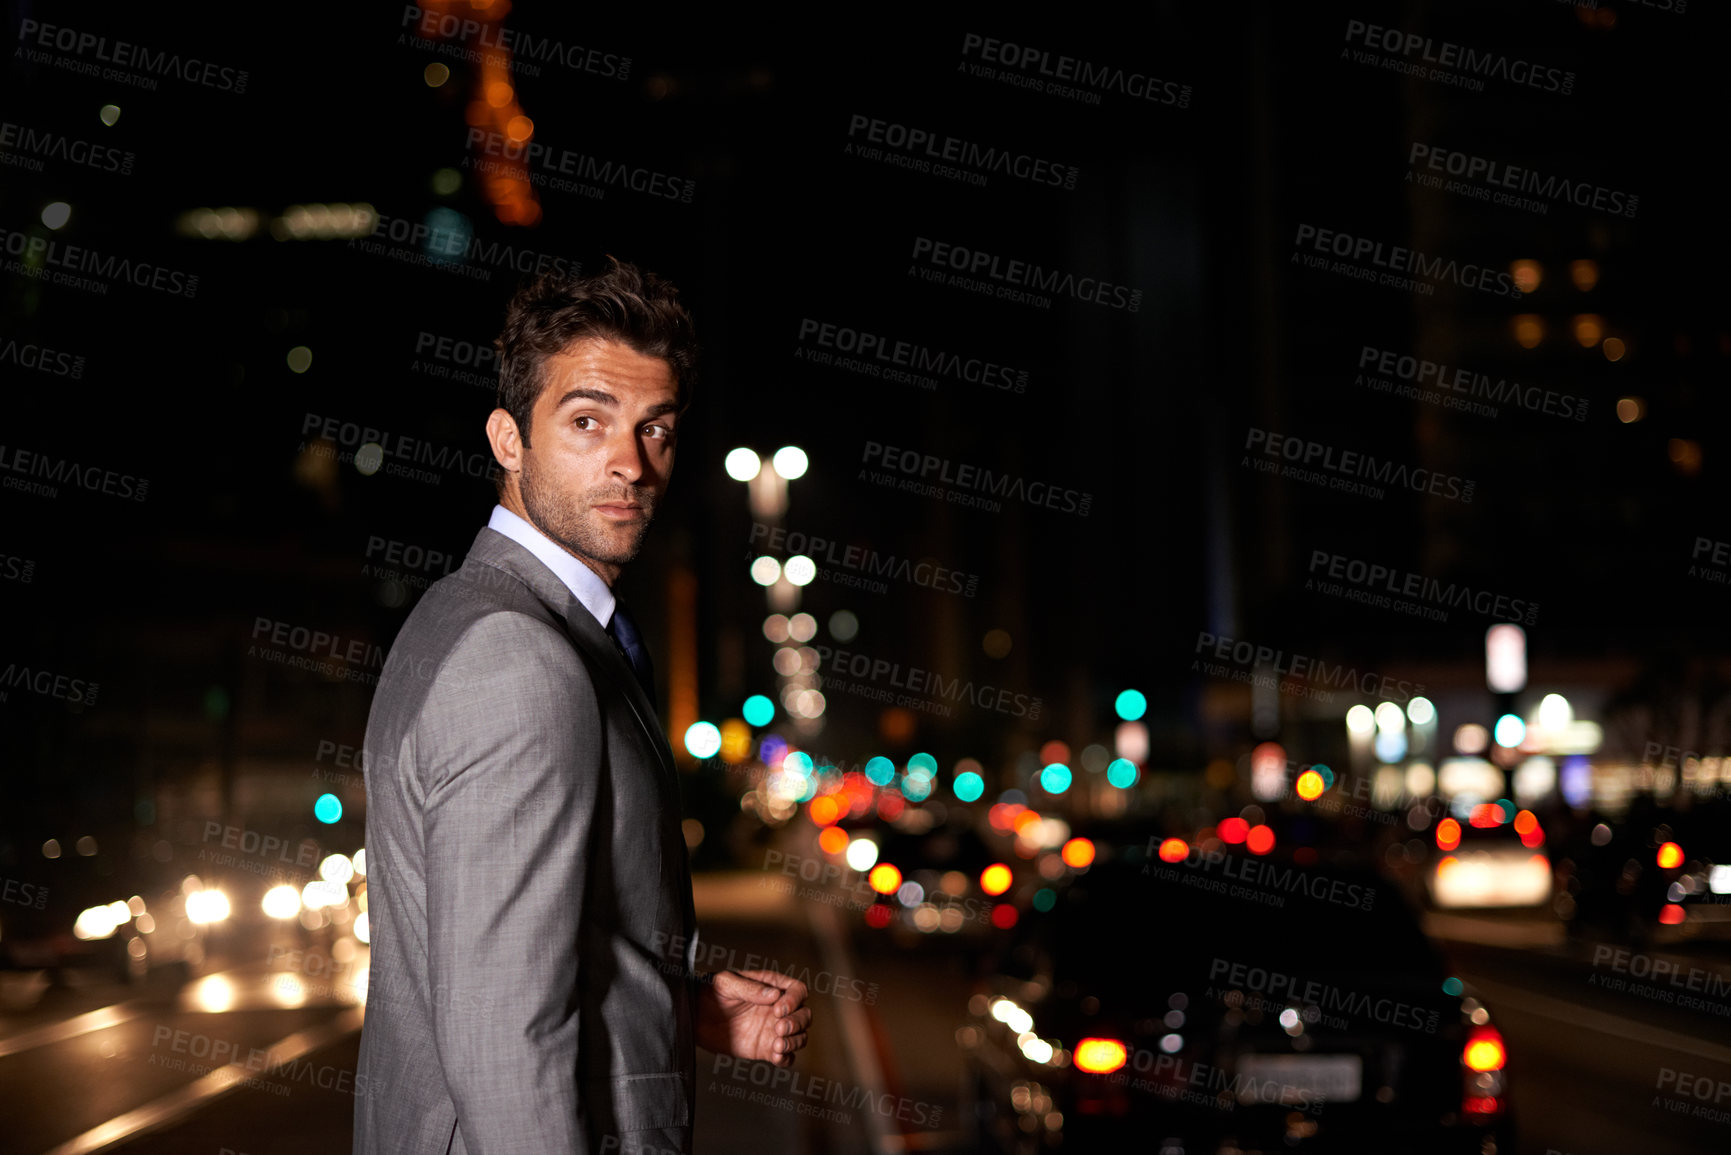 Buy stock photo A handsome businessman crossing a busy city street at night